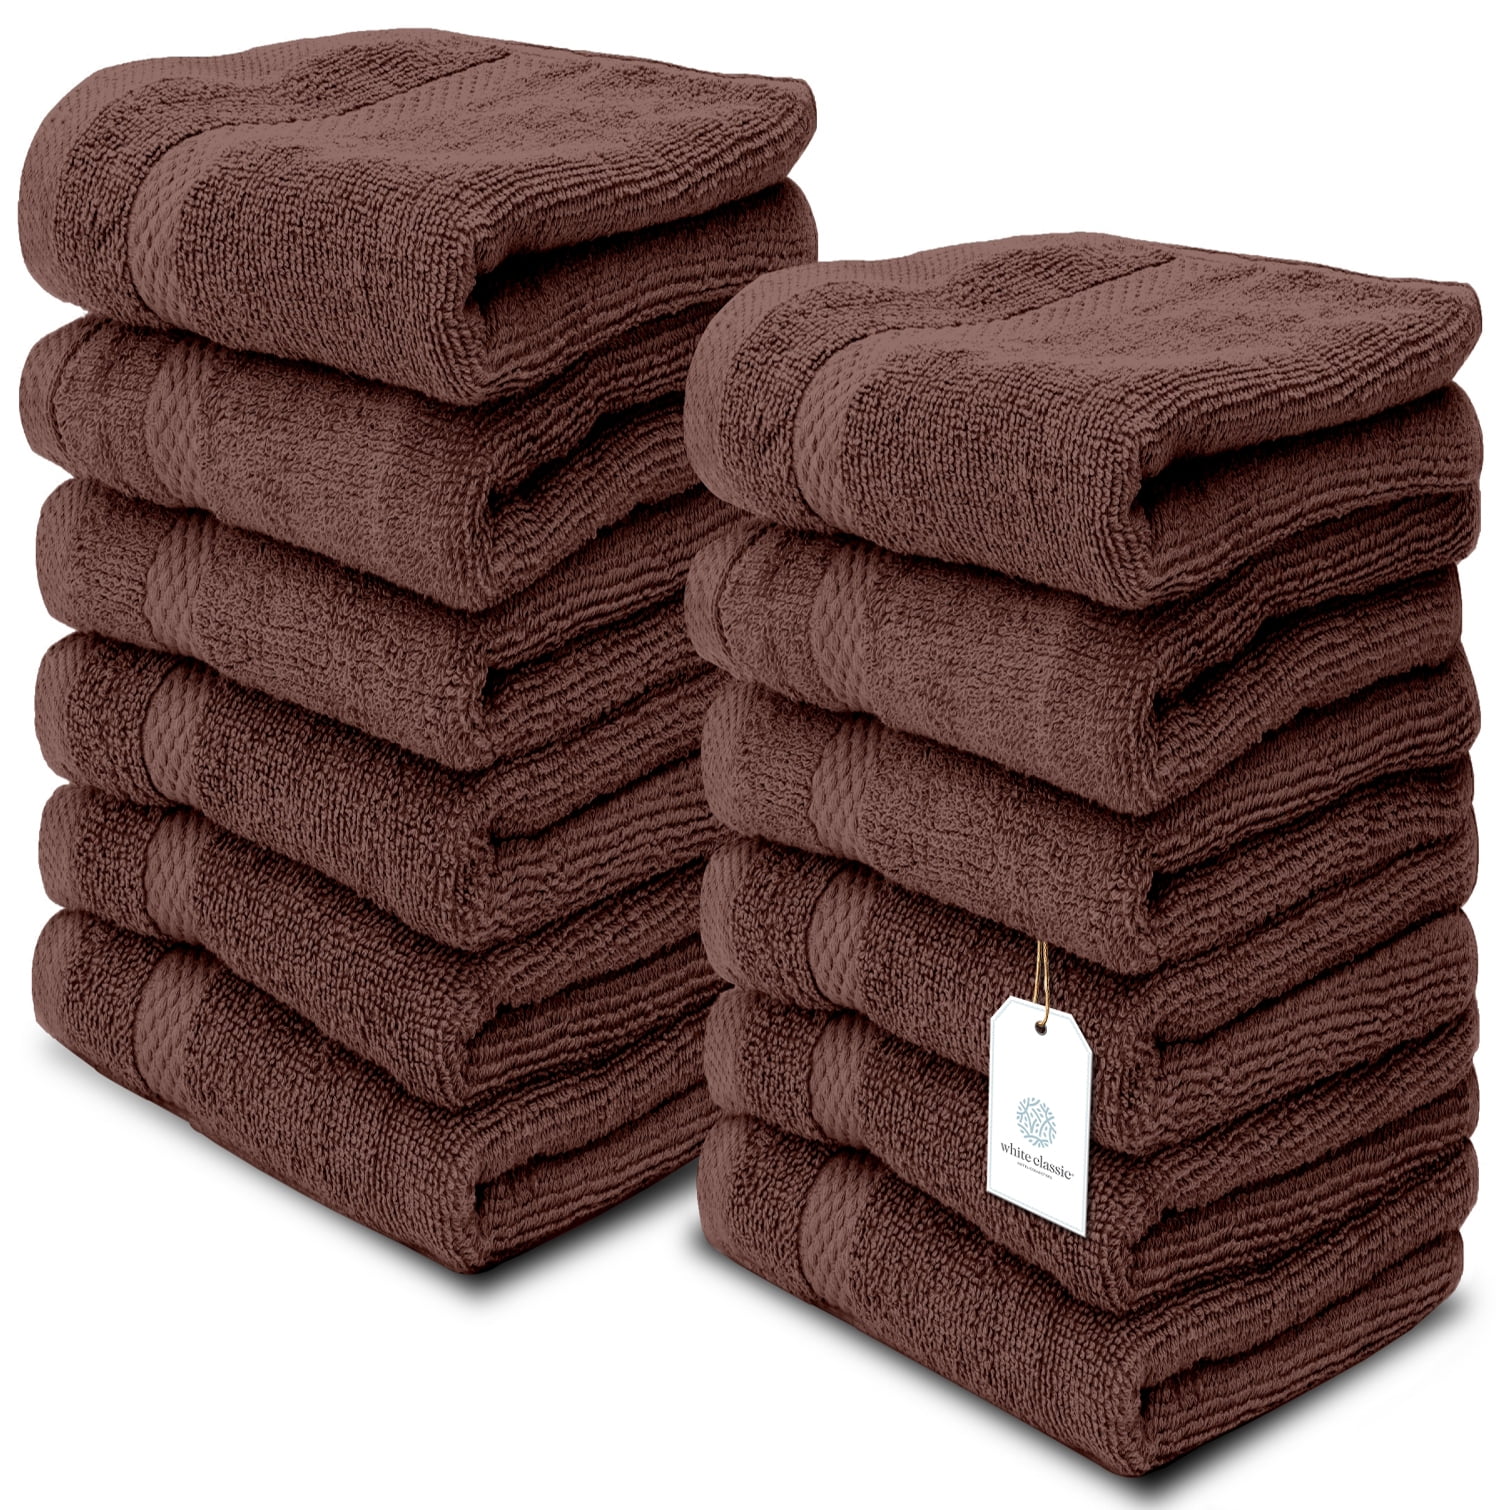 Details about   WhiteClassic Luxury Cotton Washcloths 13x13 Hotel Face TowelBrown 12/Pack 